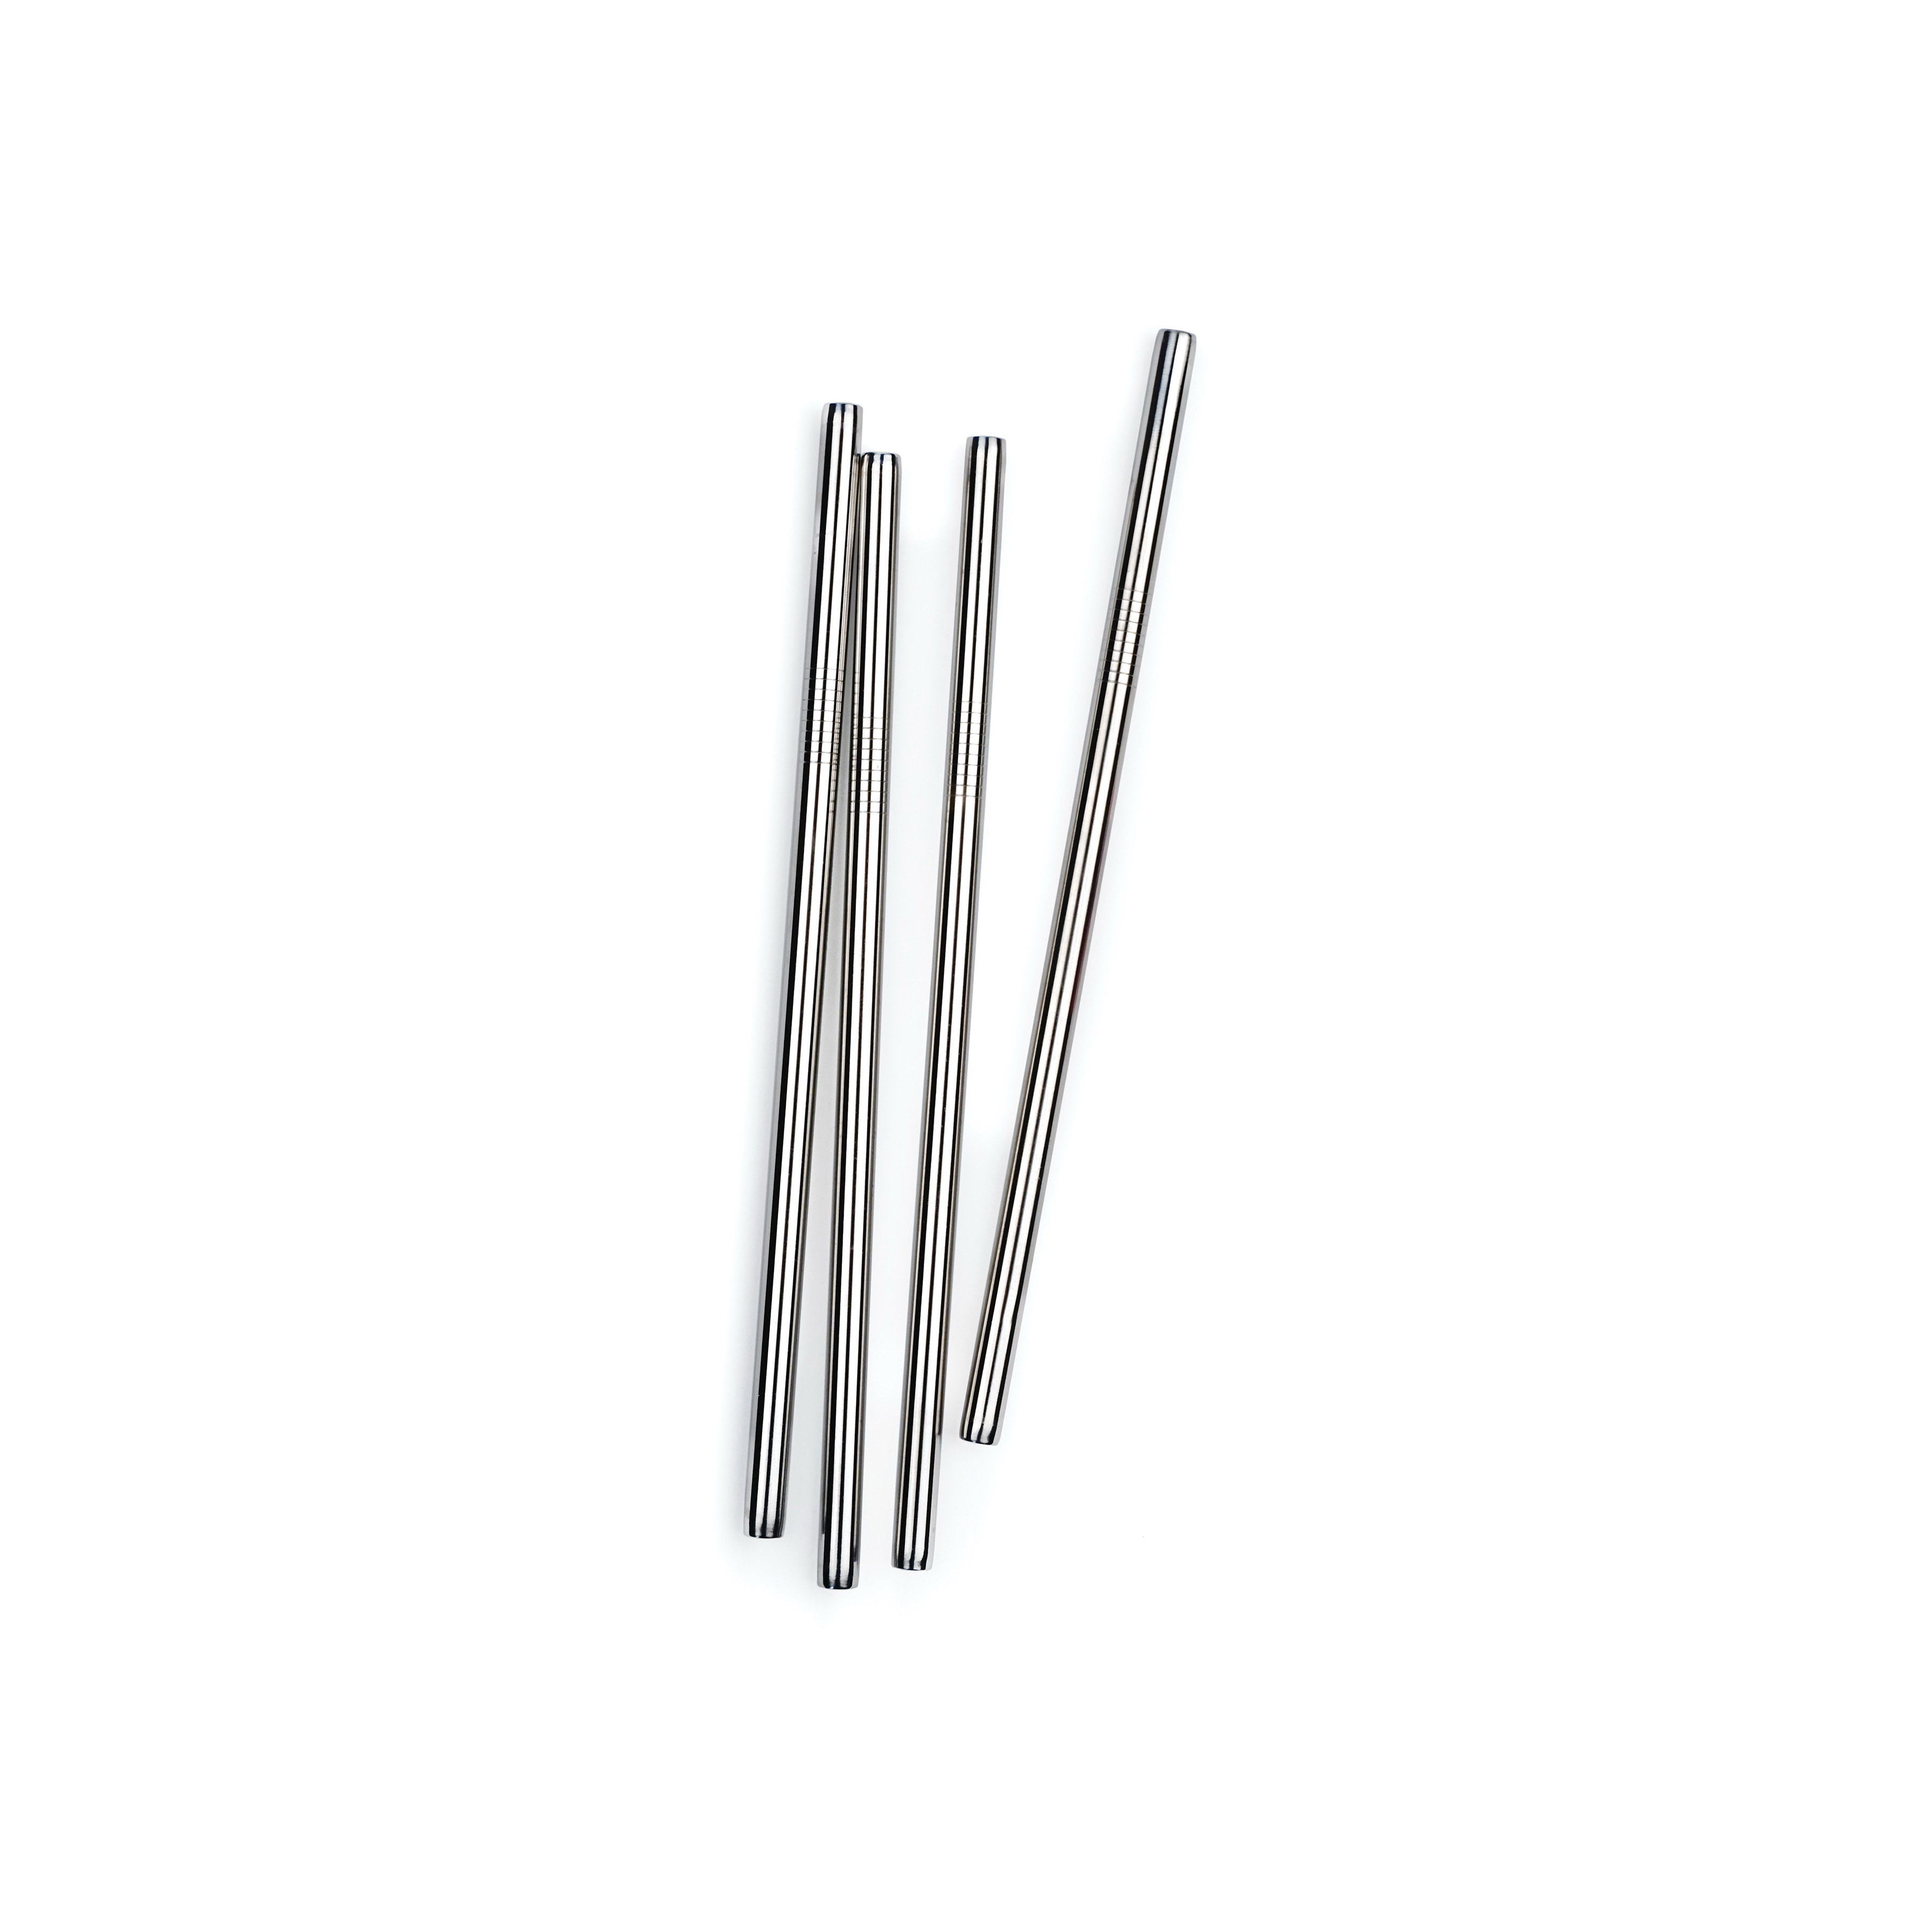 Endurance SIP-LG Straw, 8-1/2 in L, Stainless Steel - 1